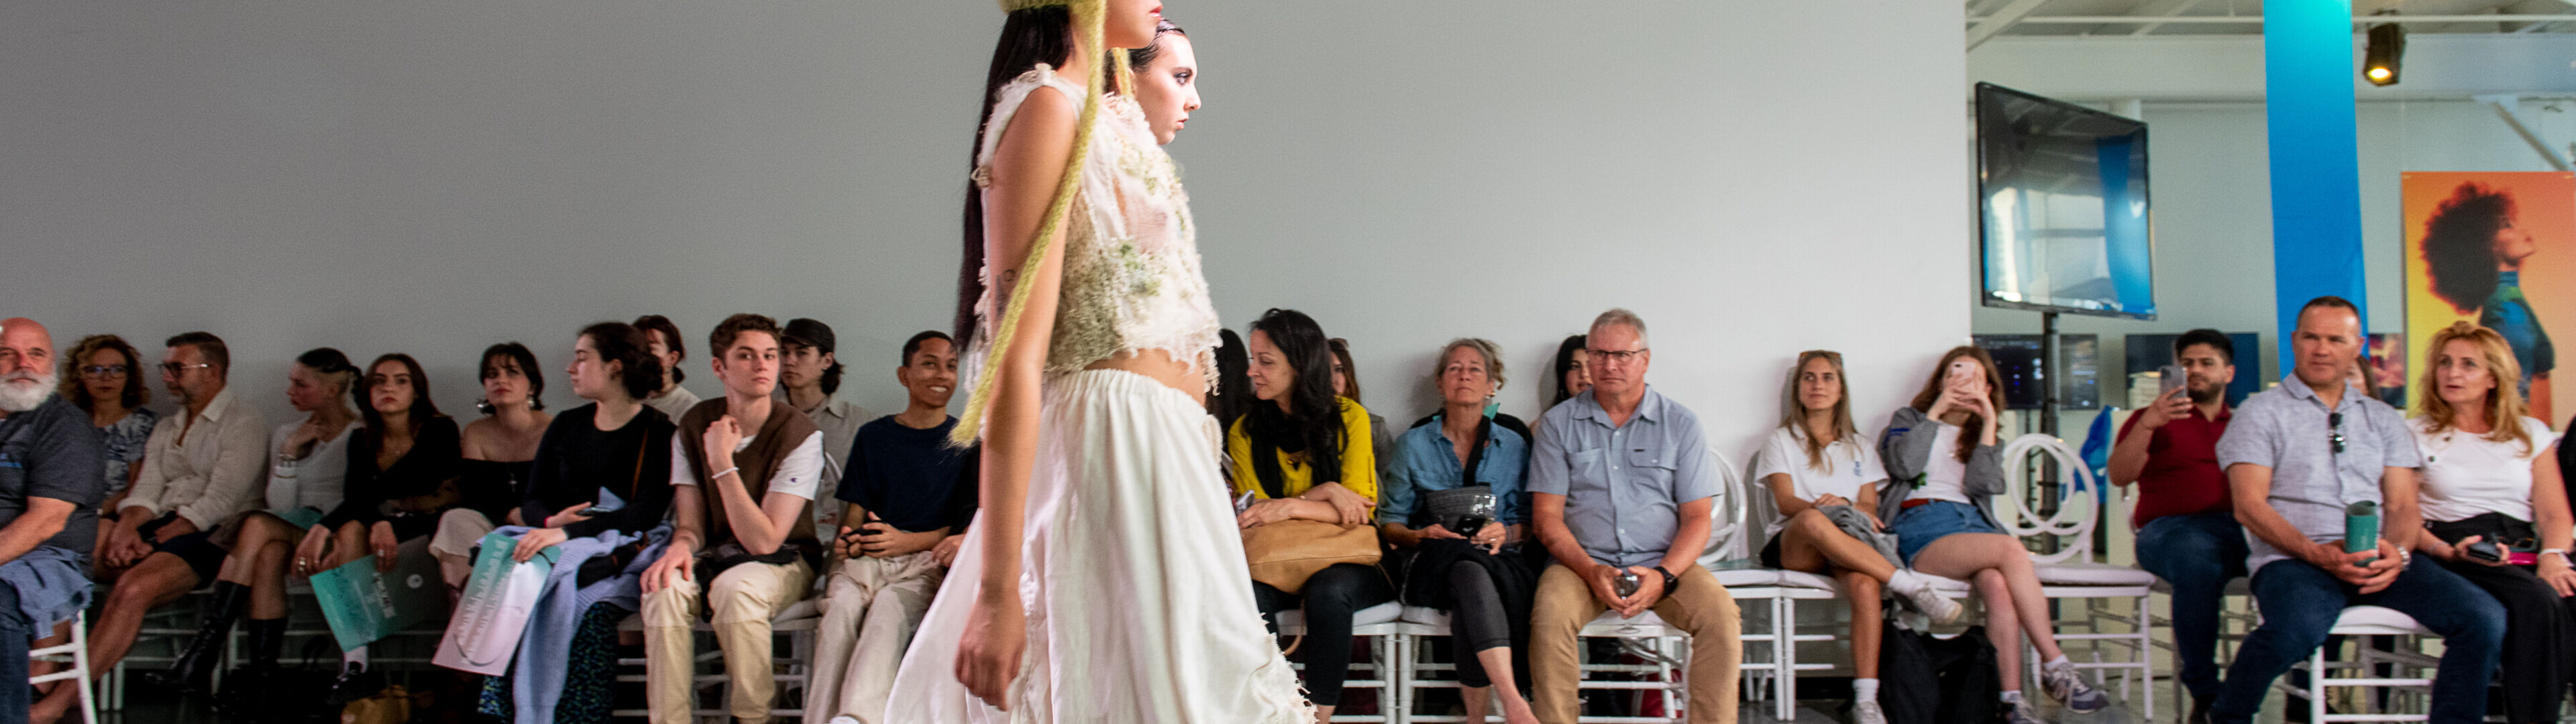 A model walks down the runway in an elegant dress with a unique headdress, audience members watching intently.